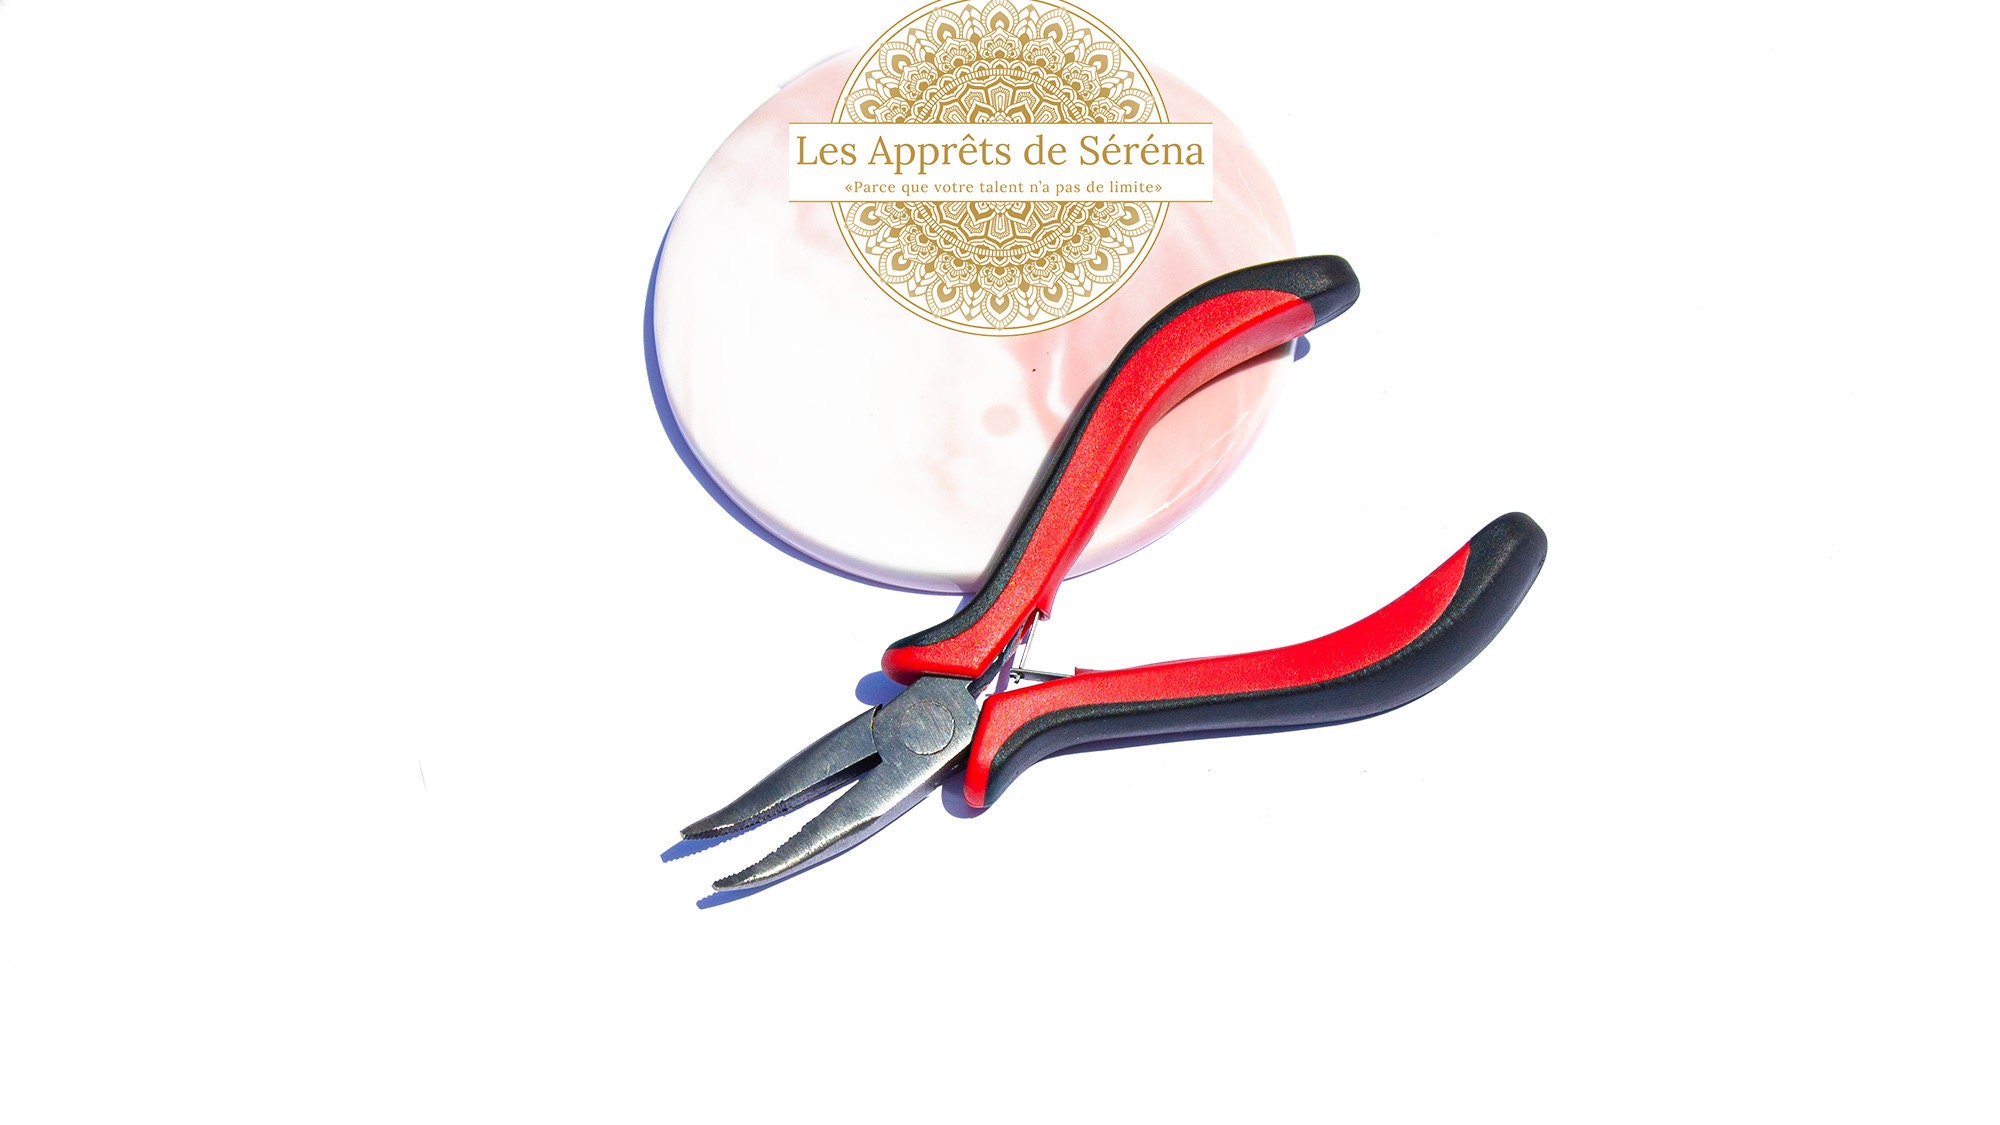 anna 4inch Round Concave Plier Wire Looping Pliers Precision